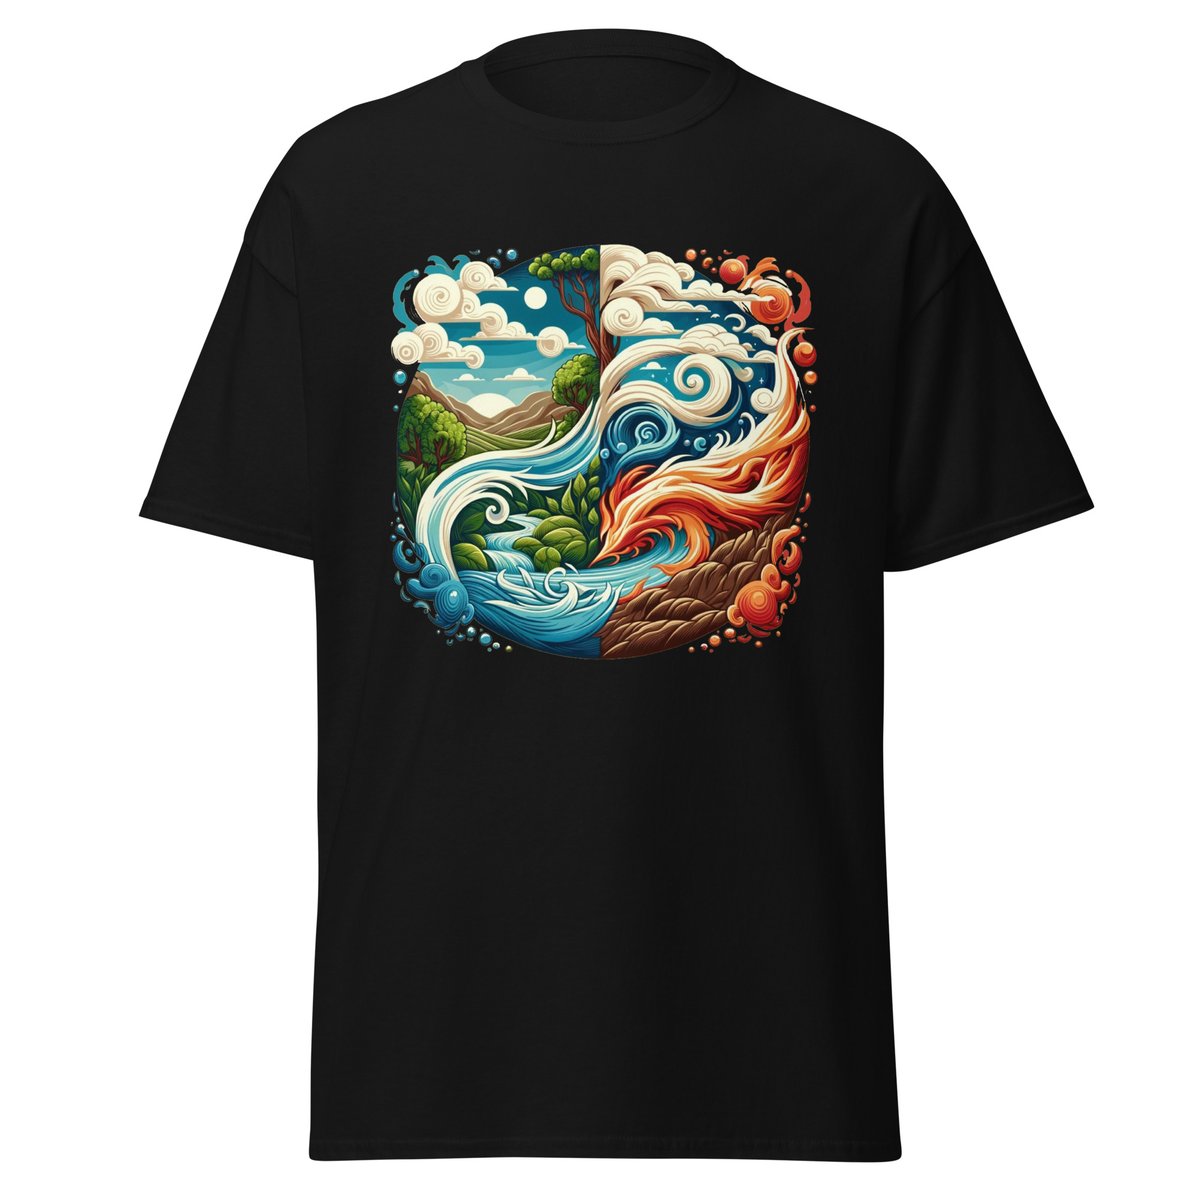 Celebrate the elements that create our world with our Elemental Harmony Tee. Earth's strength, air's freedom, fire's warmth, and water's flow all in one artful design. 🌎🌬️🔥🌊 #WearNature #ElementalTee

shhcreations.com/products/eleme…